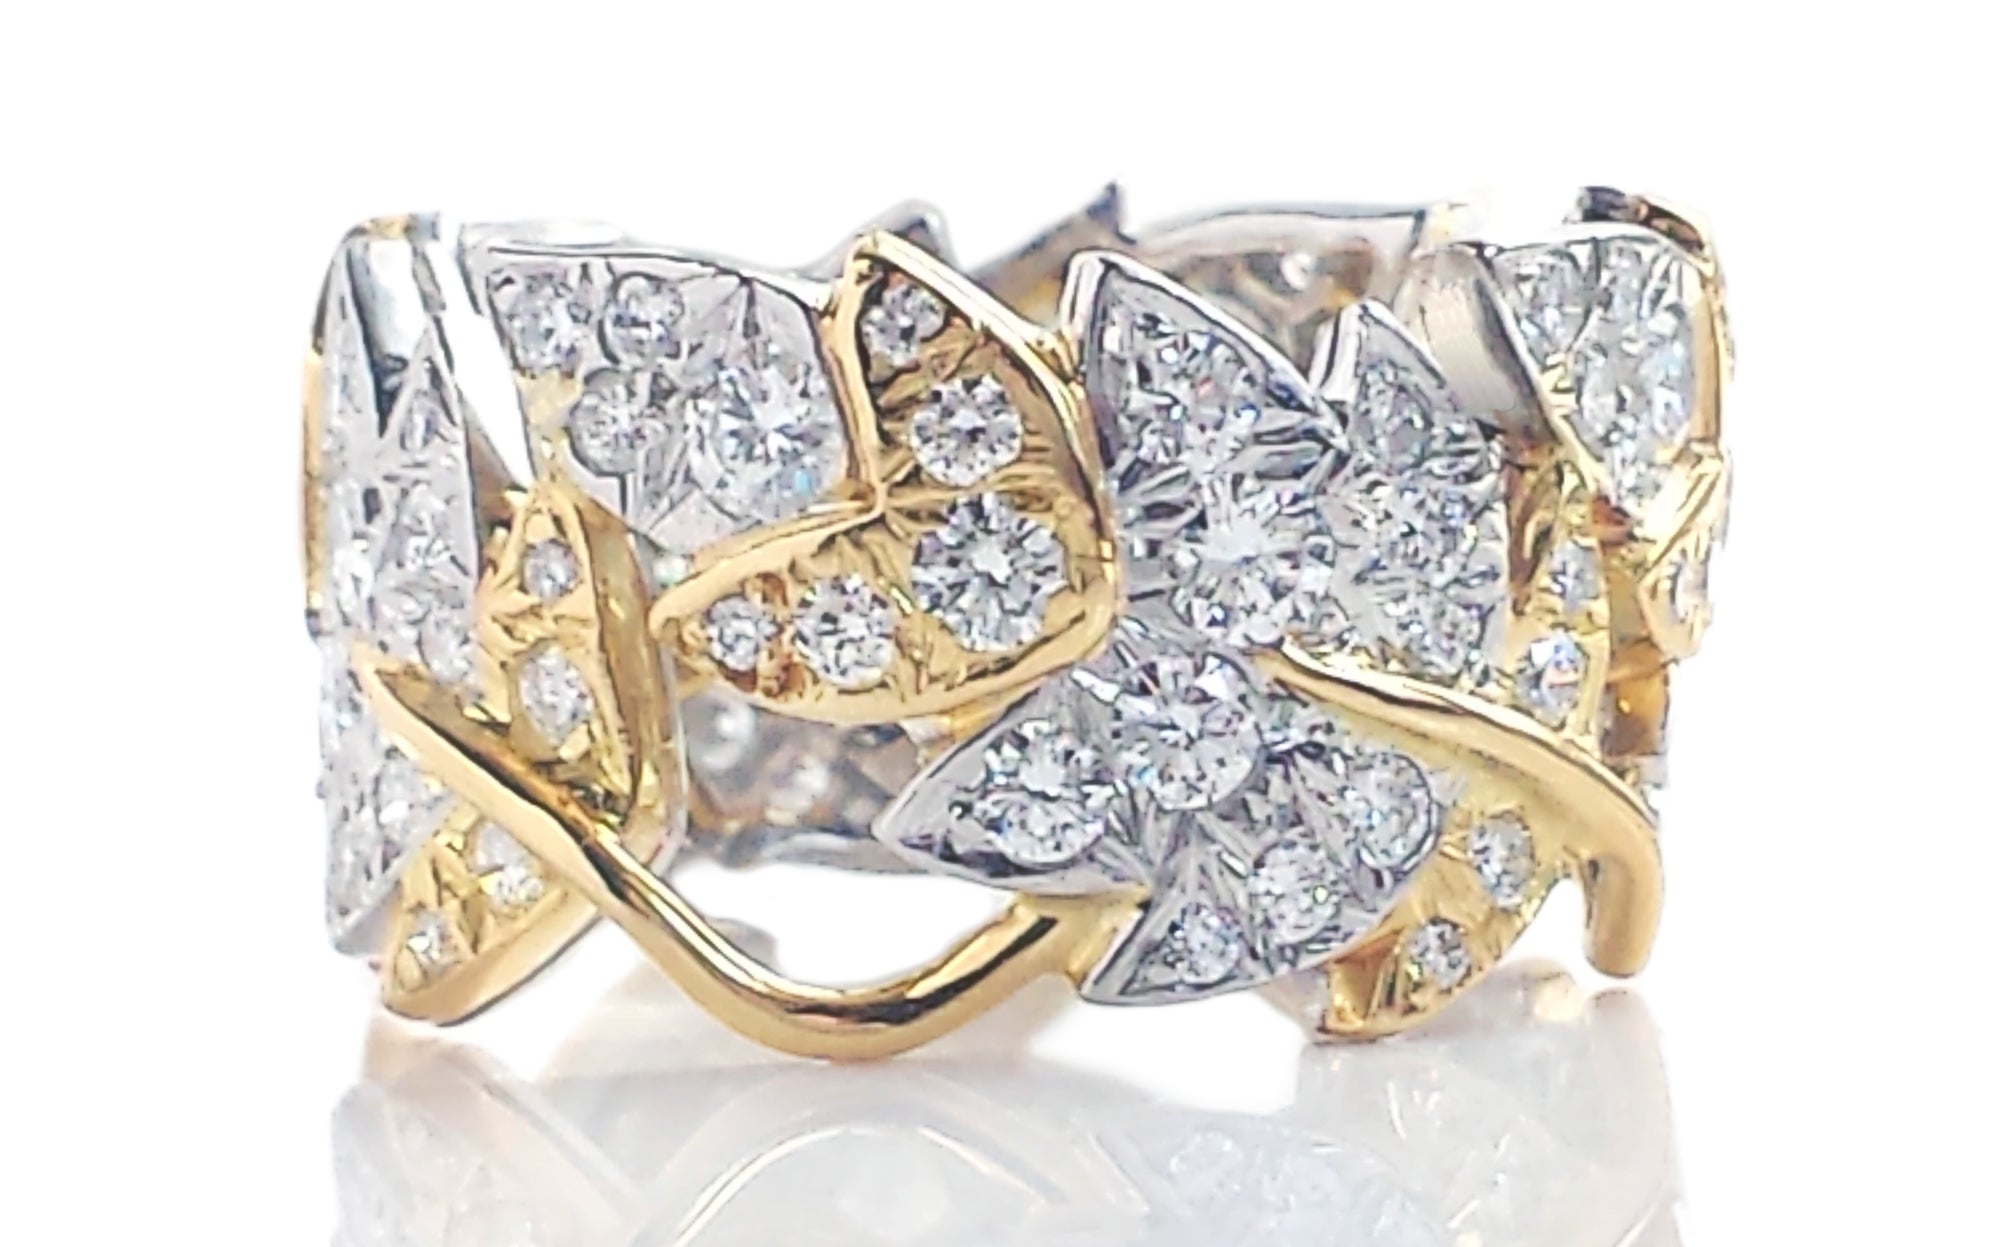 Tiffany & Co. Diamond Four Leaves Ring by Jean Schlumberger